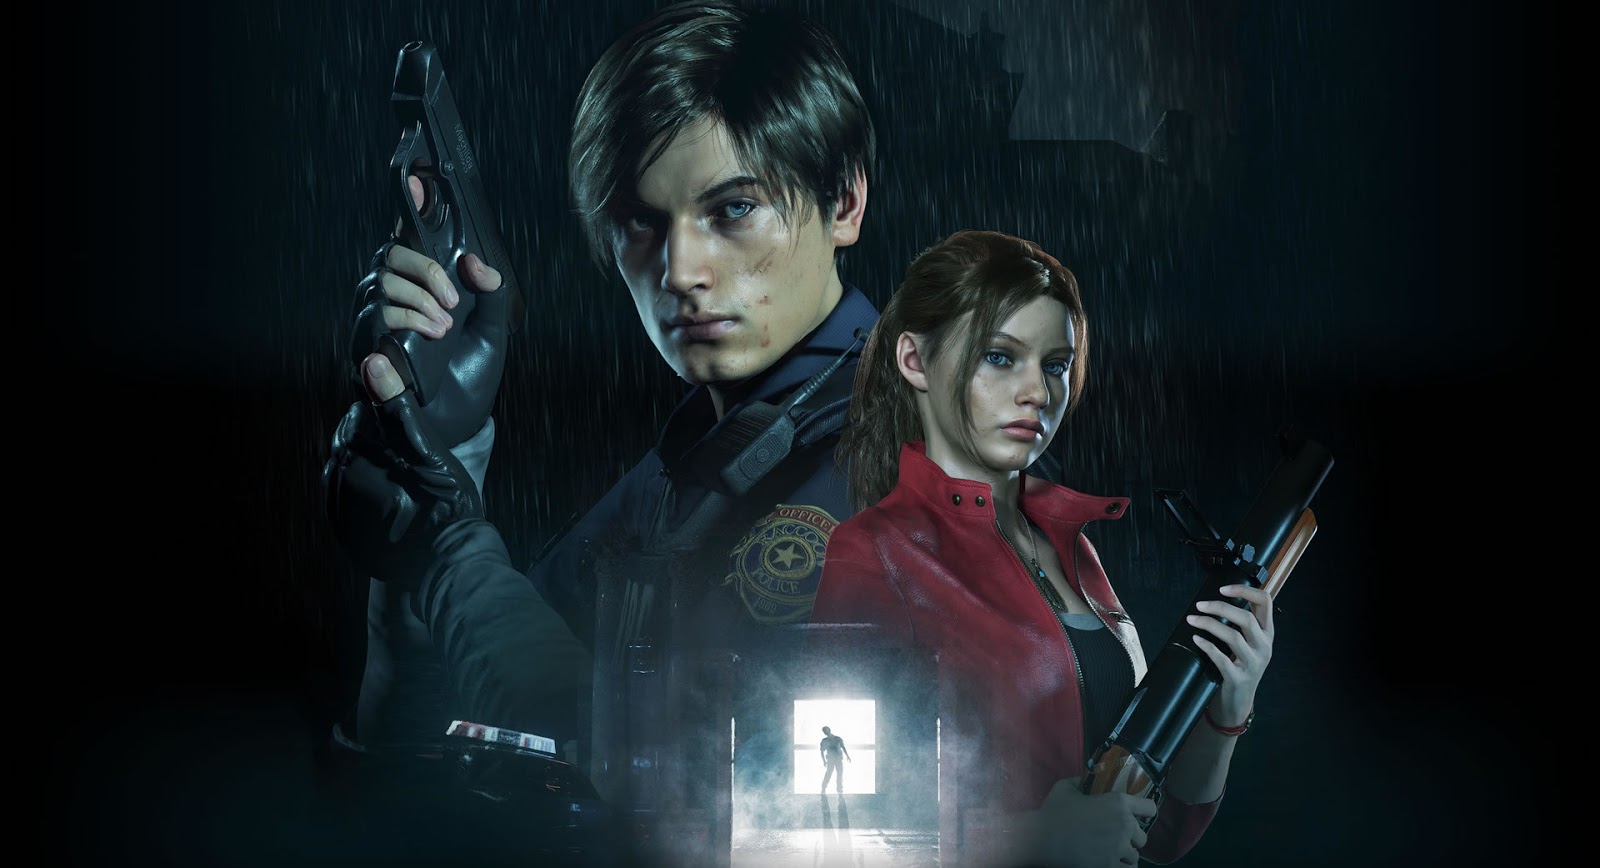 Resident Evil 2 Remake takes the Top Spot in the Franchise's selling